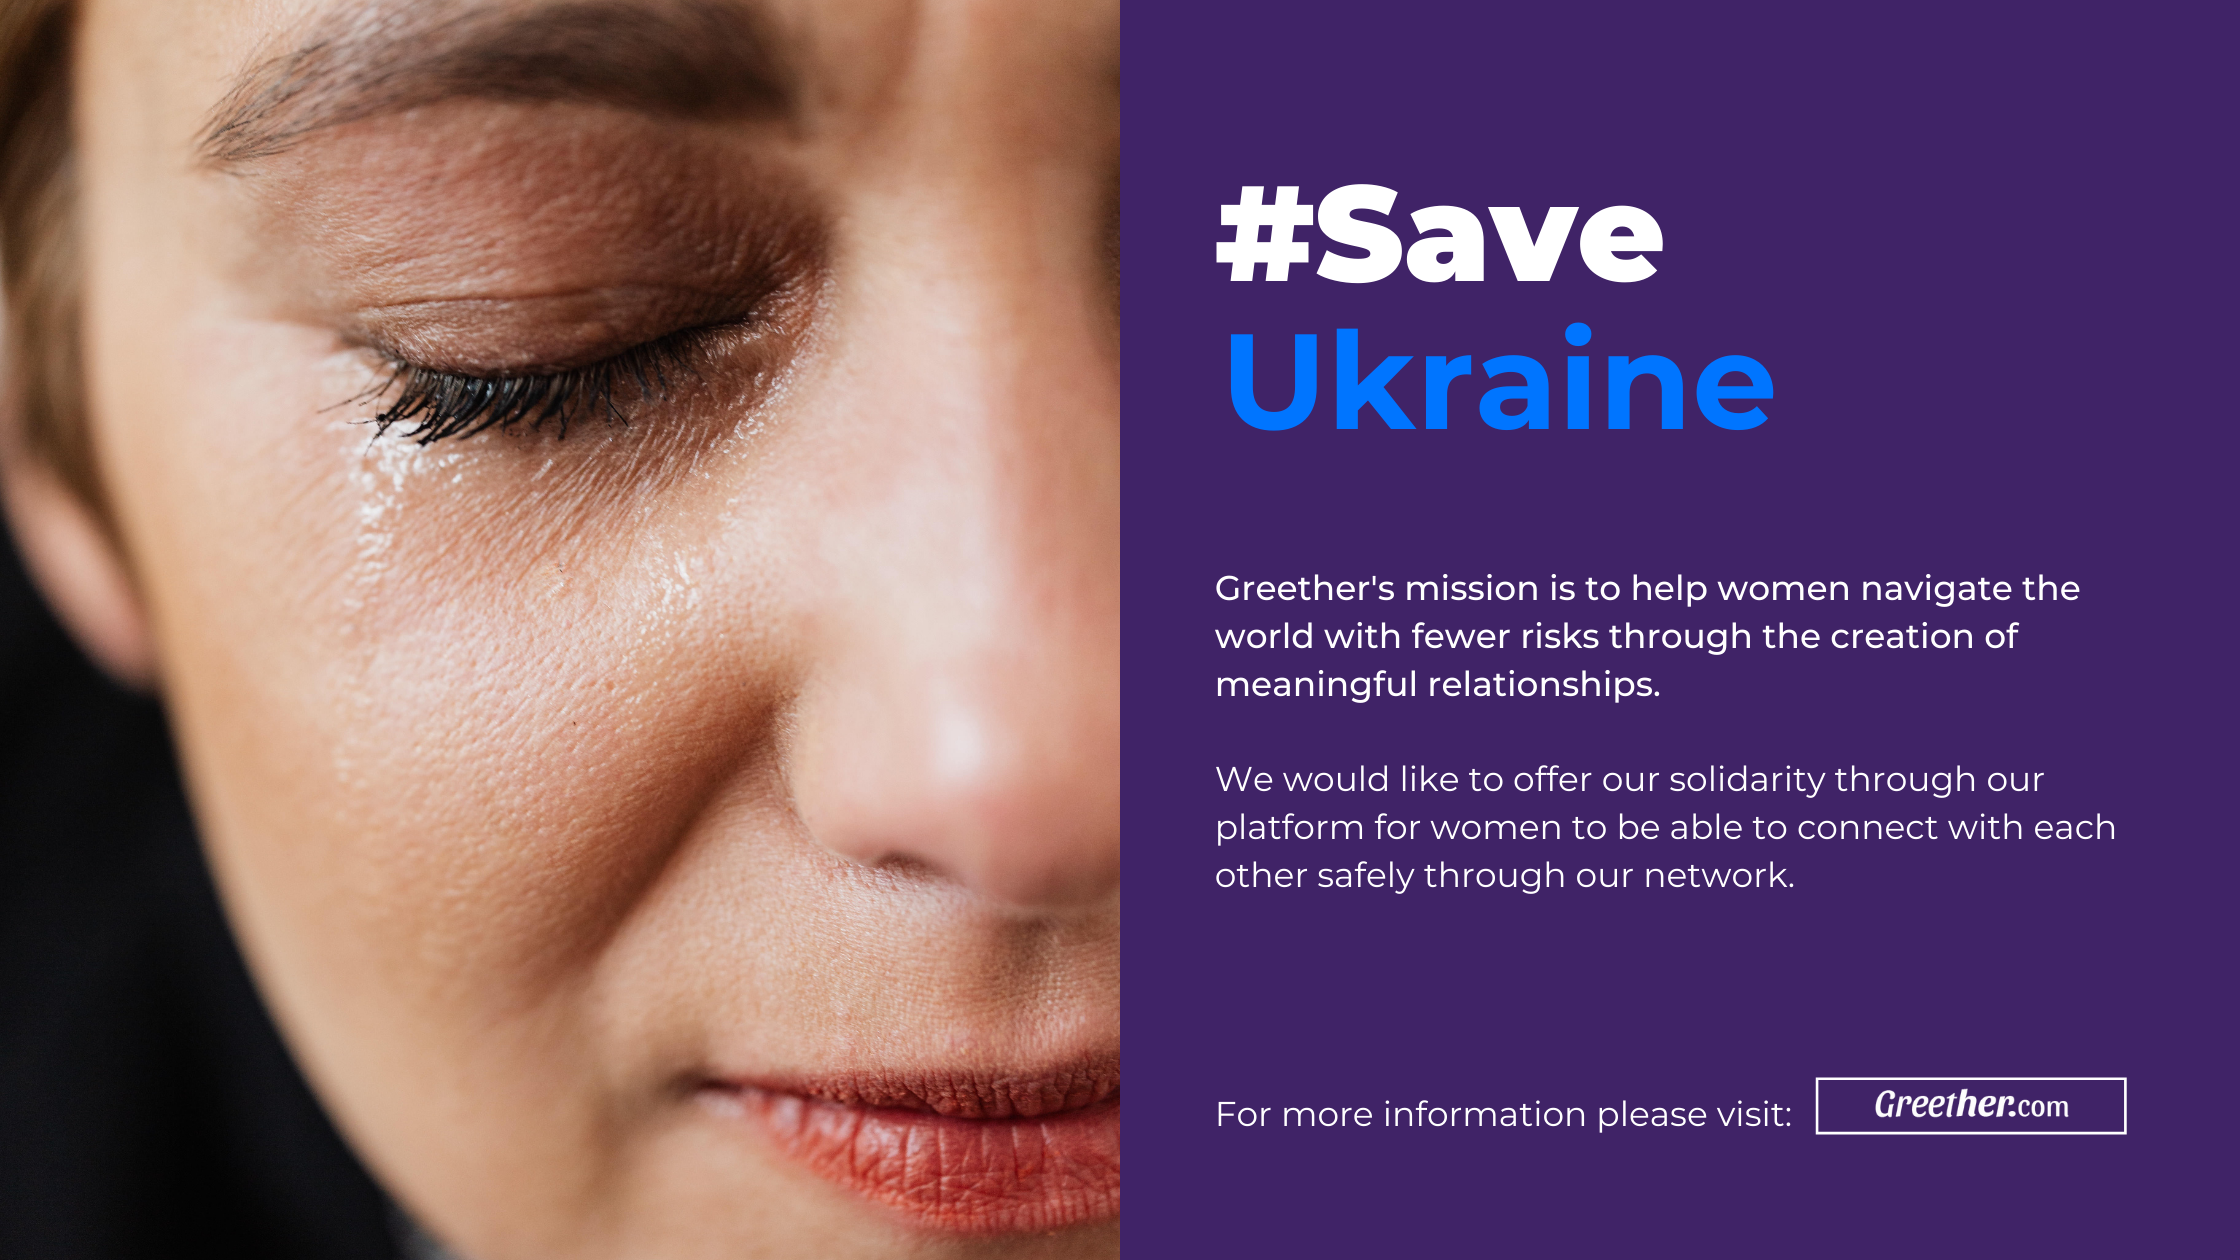 woman crying about war in Ukraine, help women